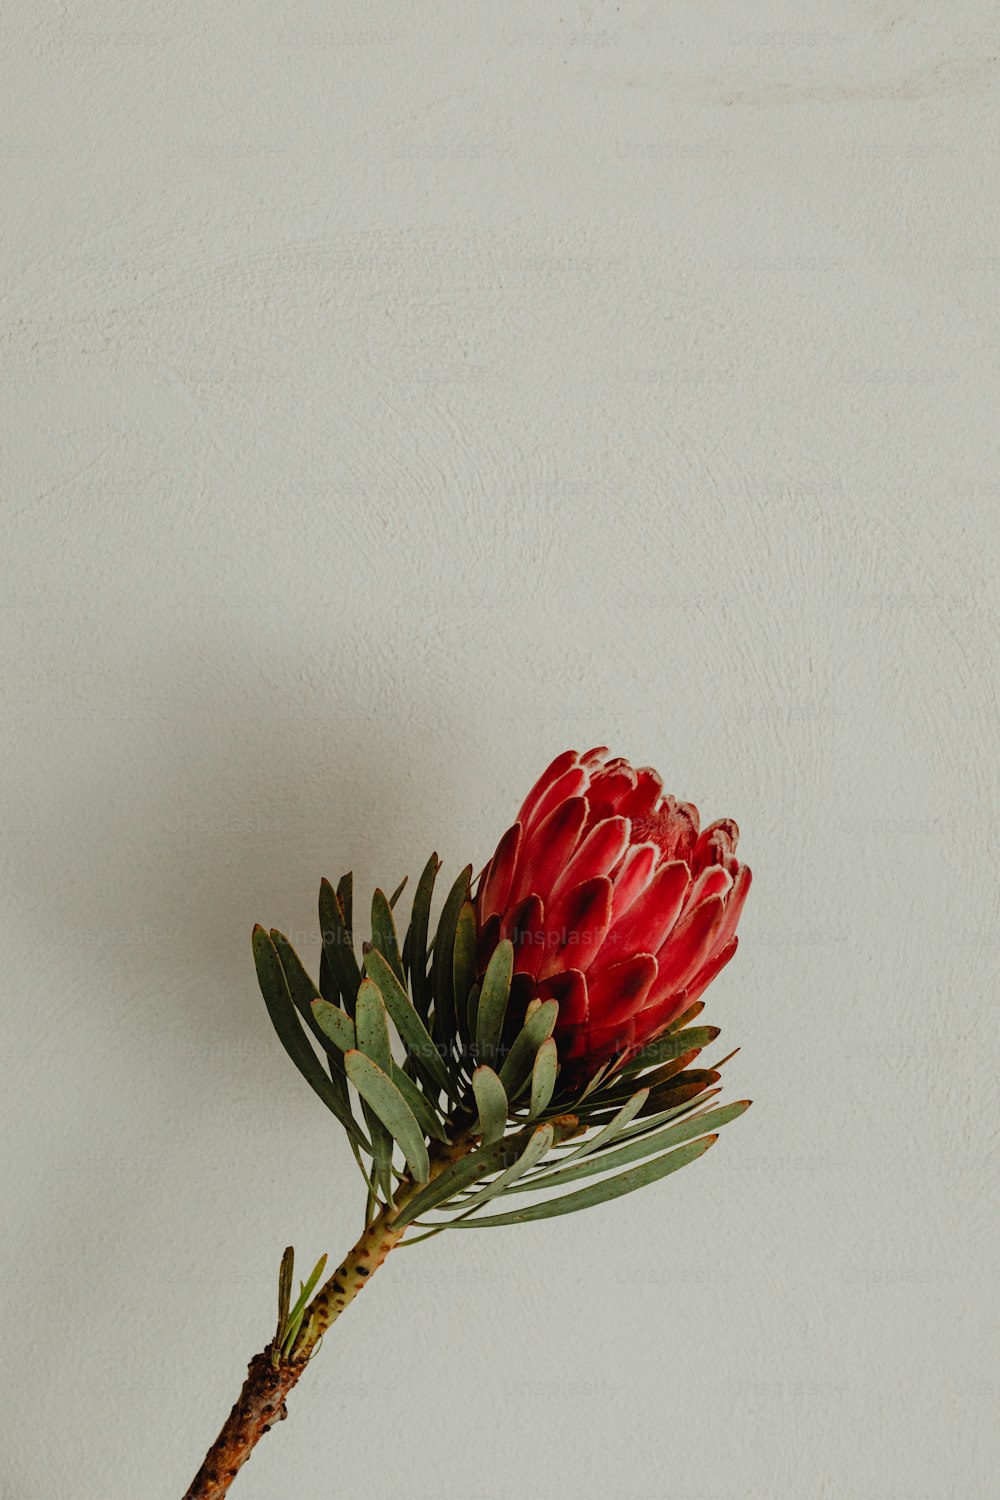 a single red flower on a stem against a white wall